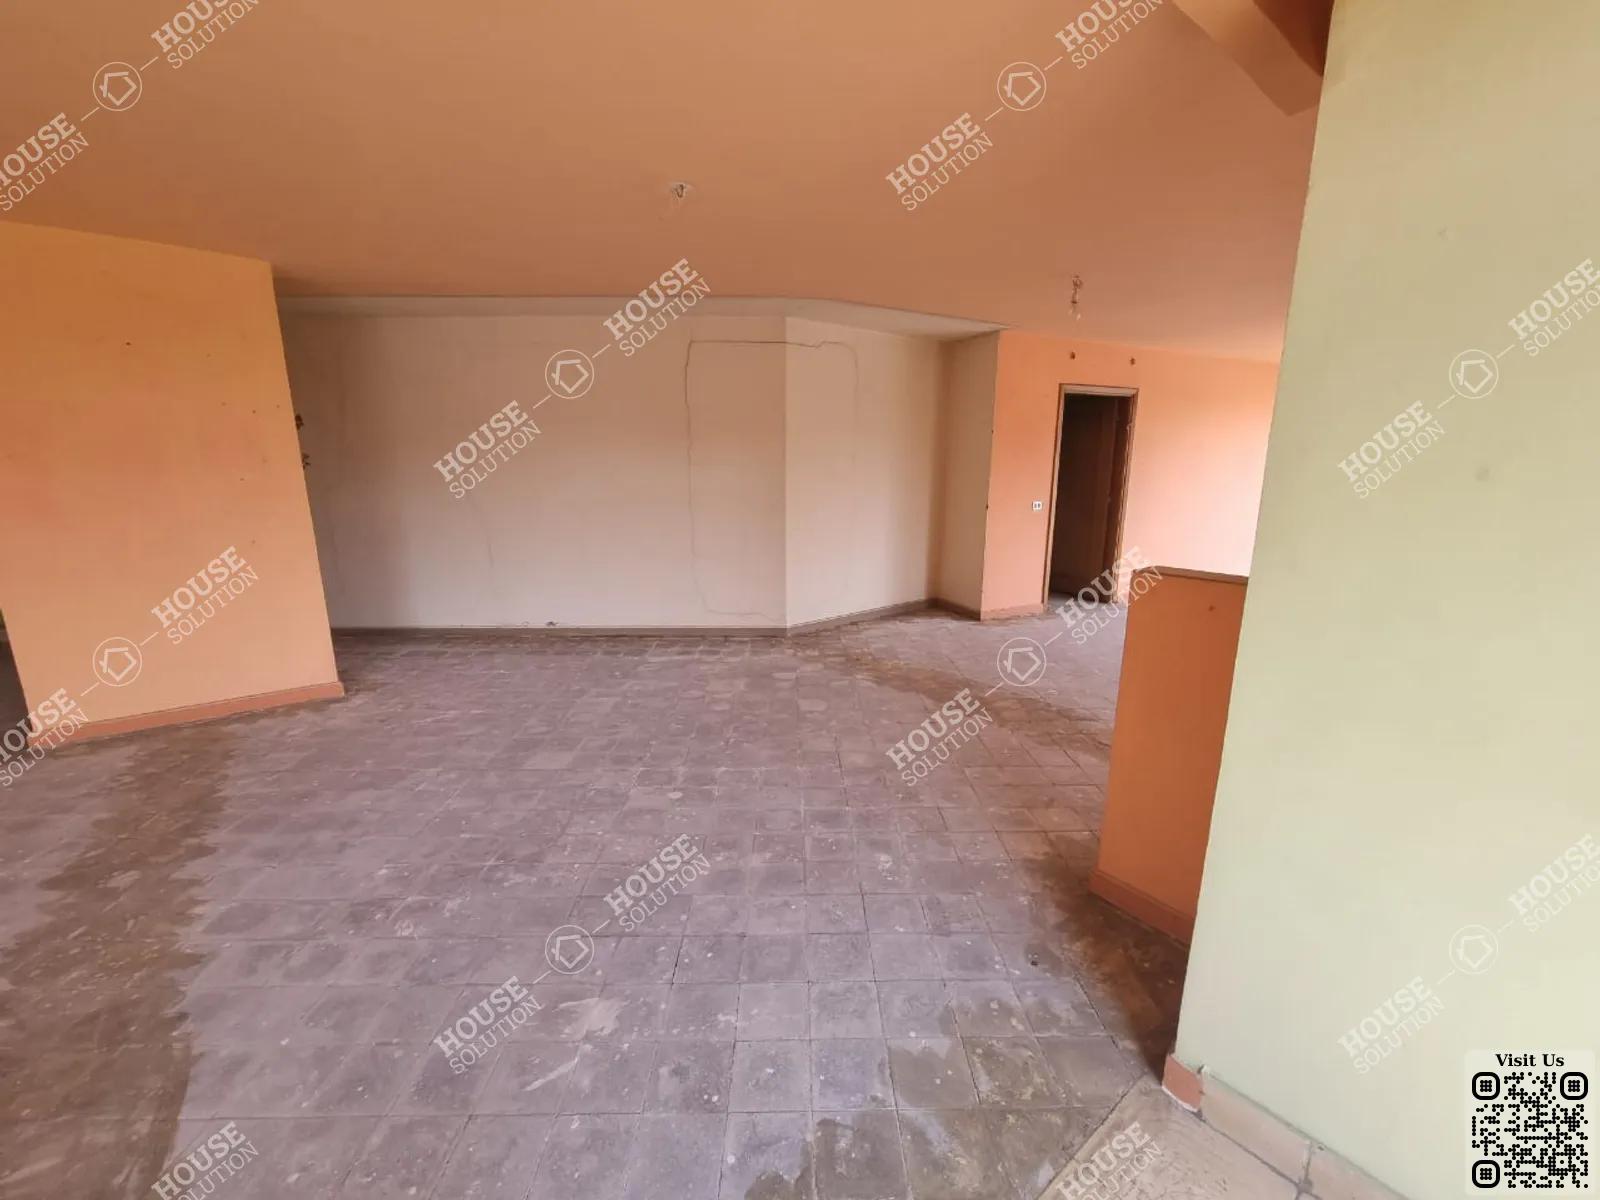 RECEPTION  @ Office spaces For Sale In Maadi Old Maadi Area: 320 m² consists of 4 Bedrooms 3 Bathrooms Semi Finished 5 stars #5605-1